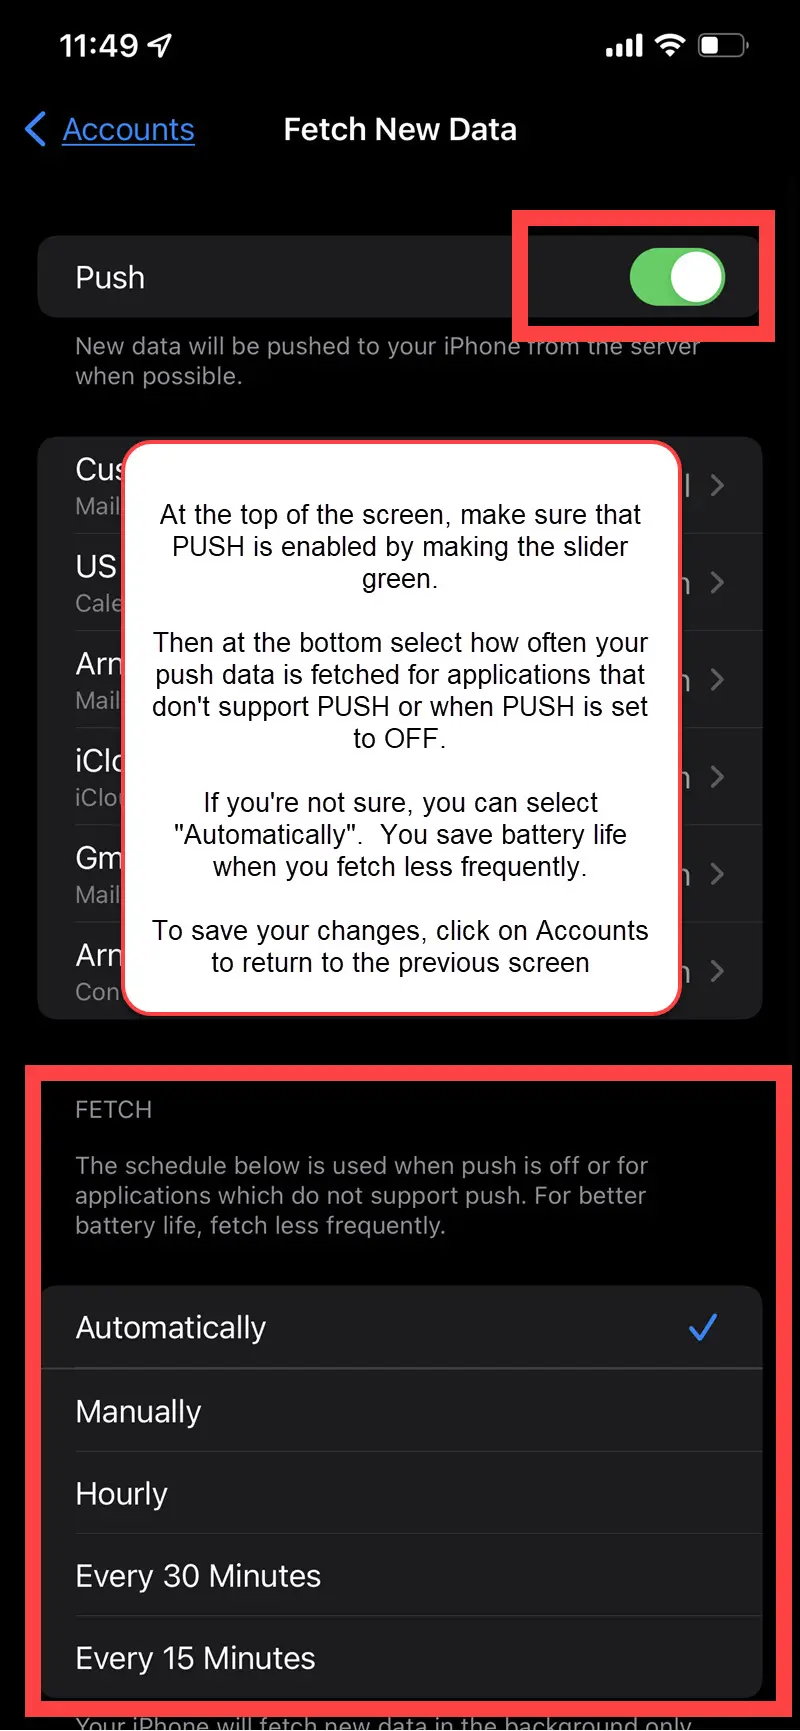 Enable Push and select fetch settings